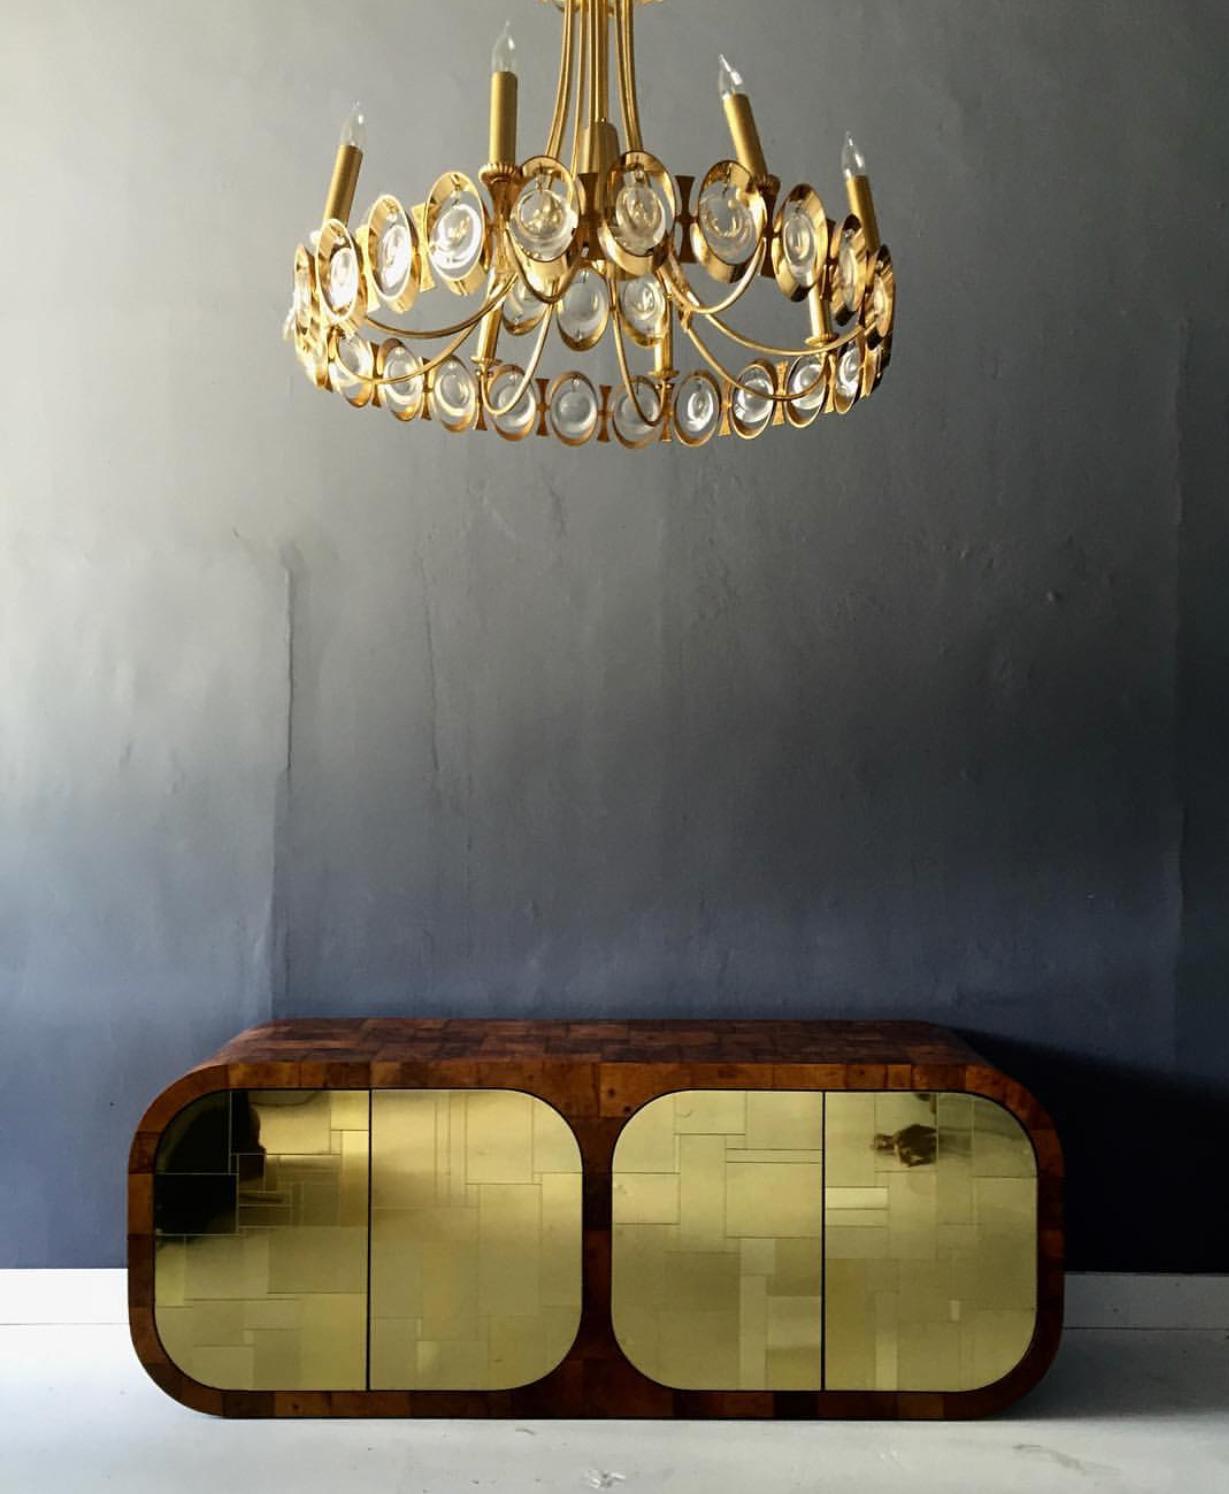 A stunning eight-light chandelier with a central down light, made by Palwa in Germany circa 1960s. The piece is of Hollywood Regency high glamour style with 24K gold plated brass and crystal discs. Inspired by a classic form but infused with 60s